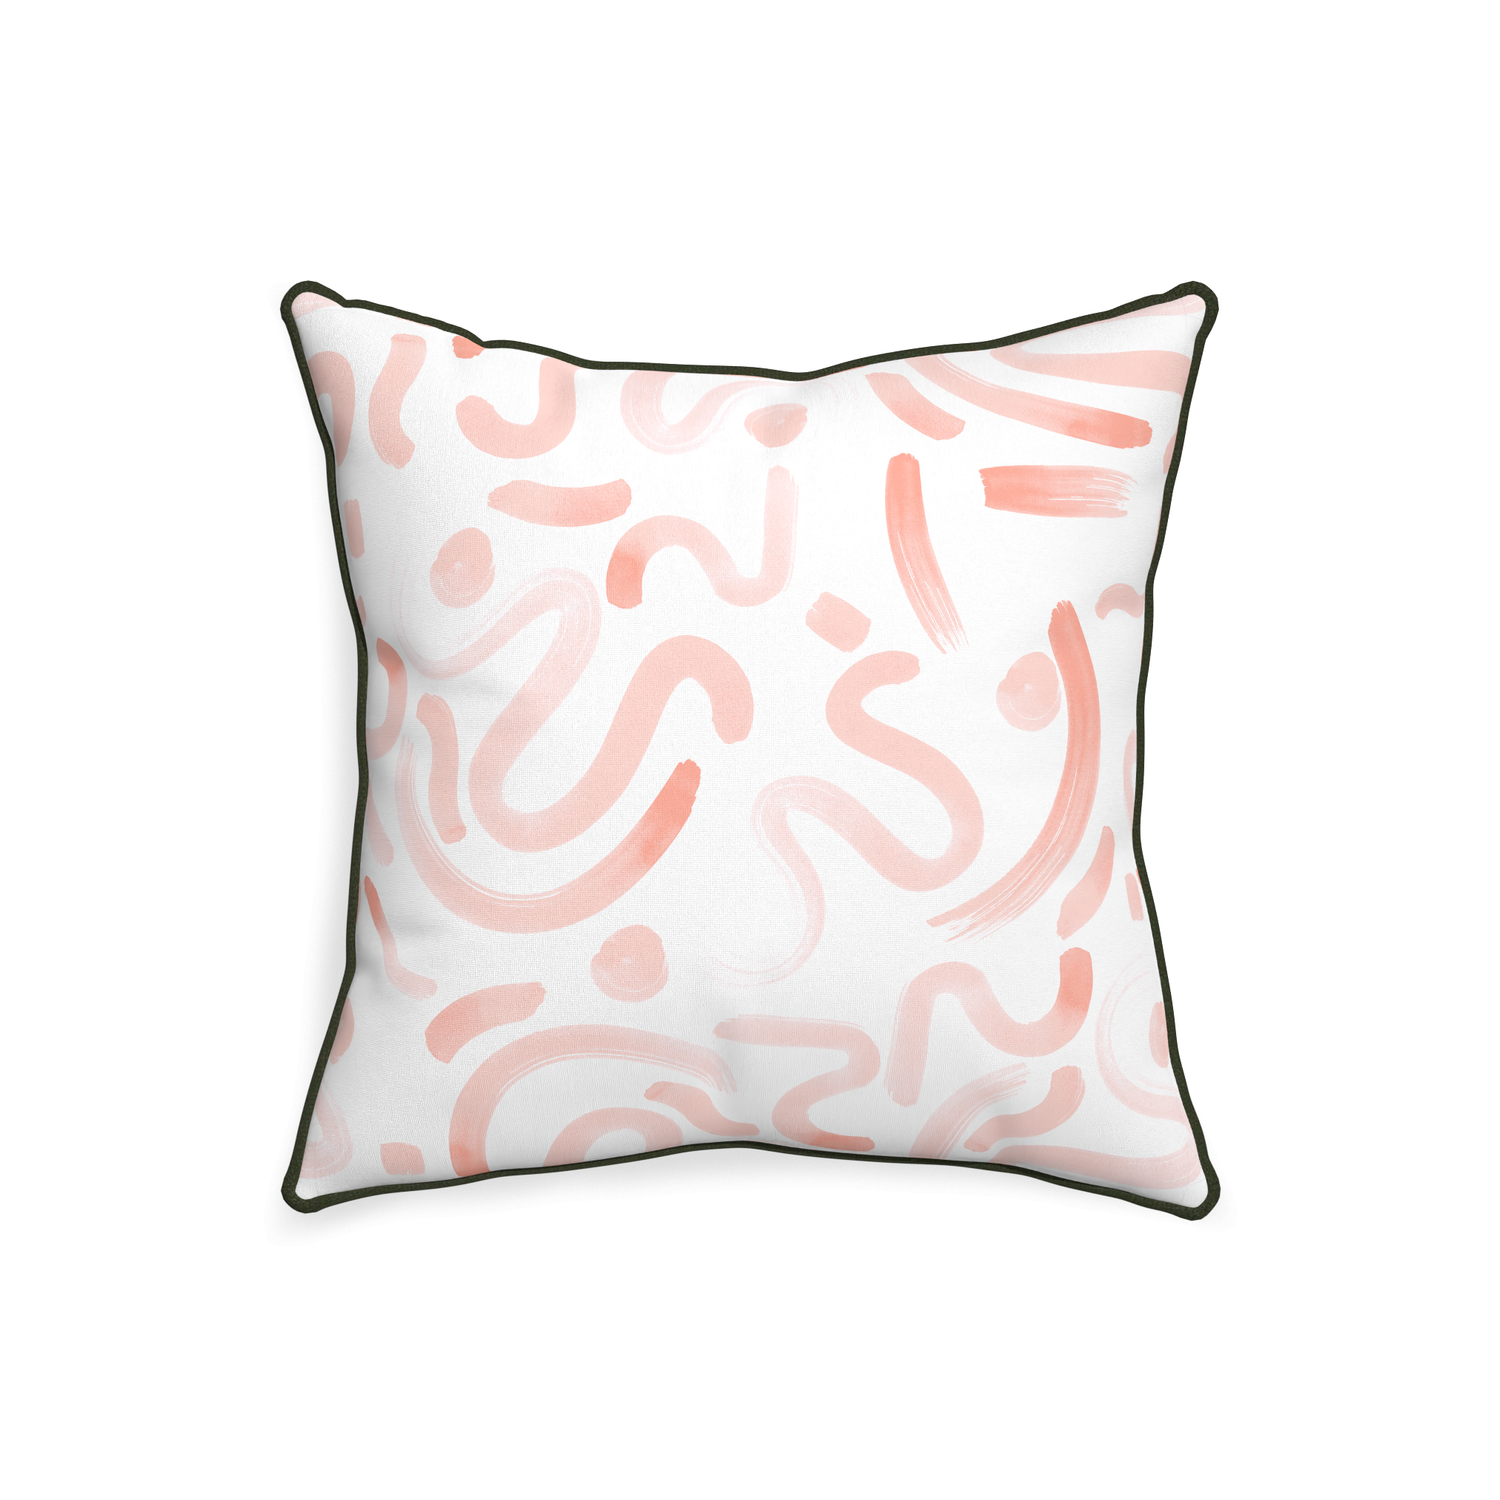 20-square hockney pink custom pink graphicpillow with f piping on white background